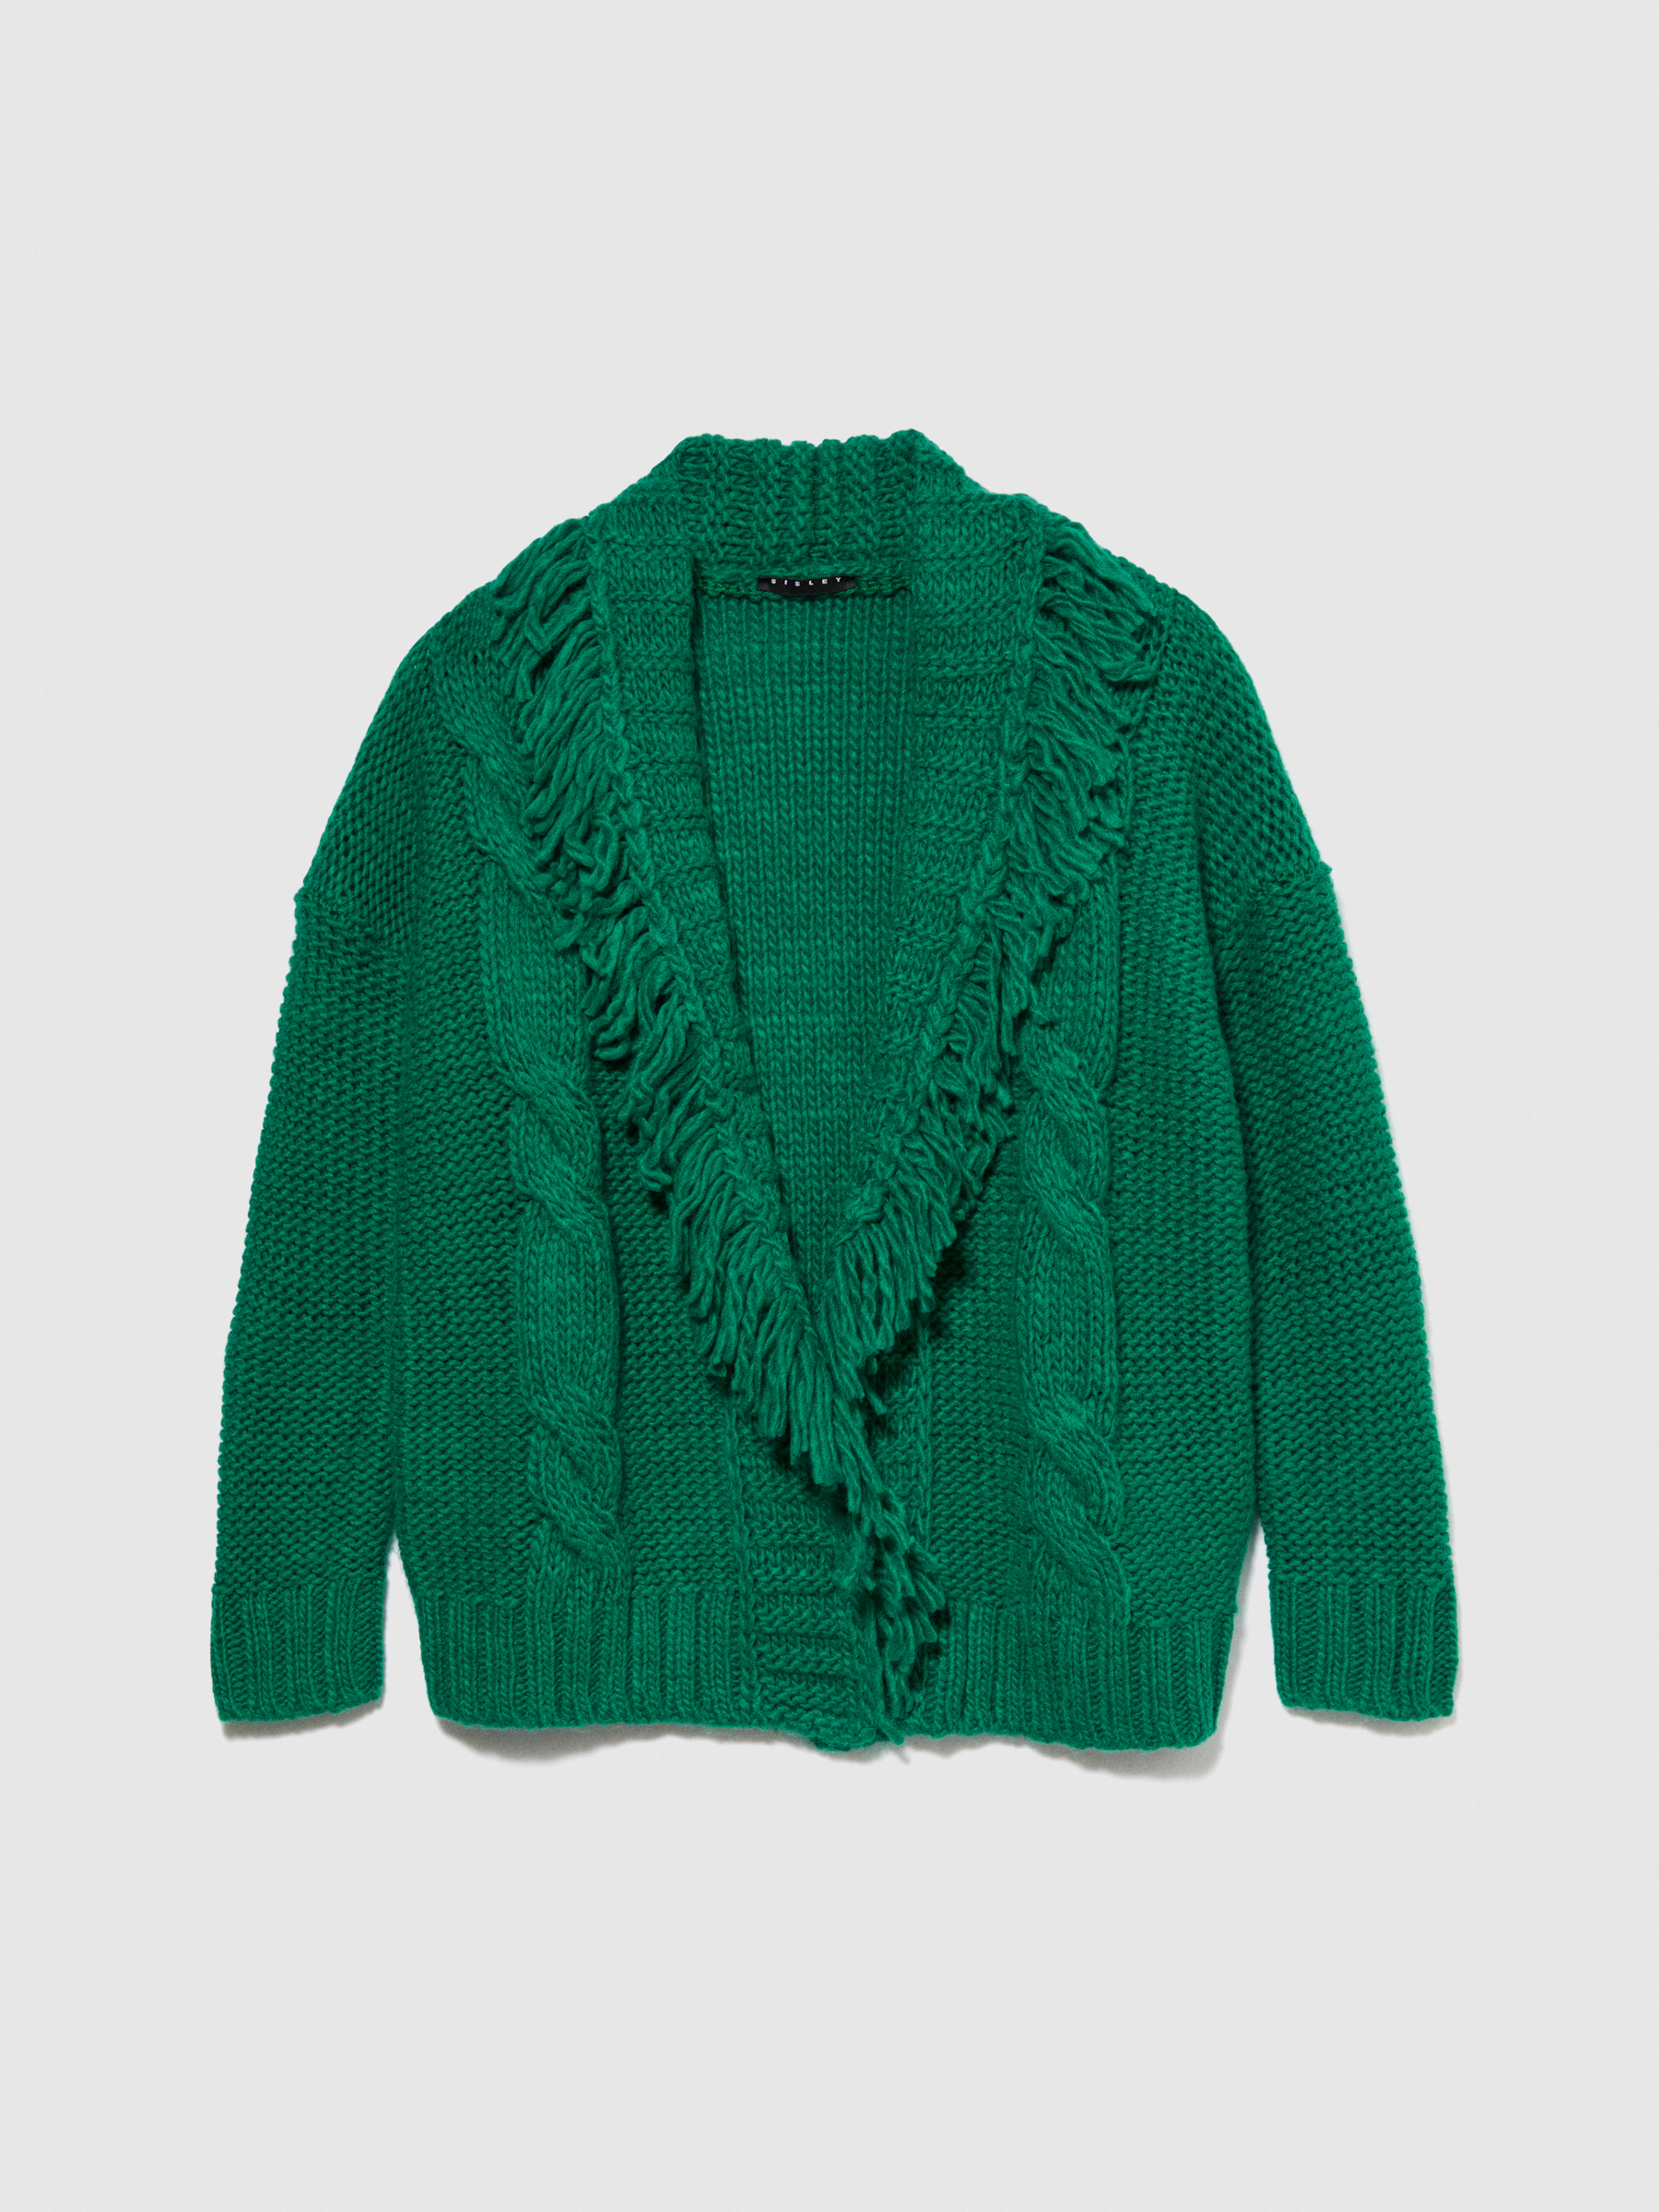 Sisley Young - Cardigan With Fringes, Woman, Green, Size: M